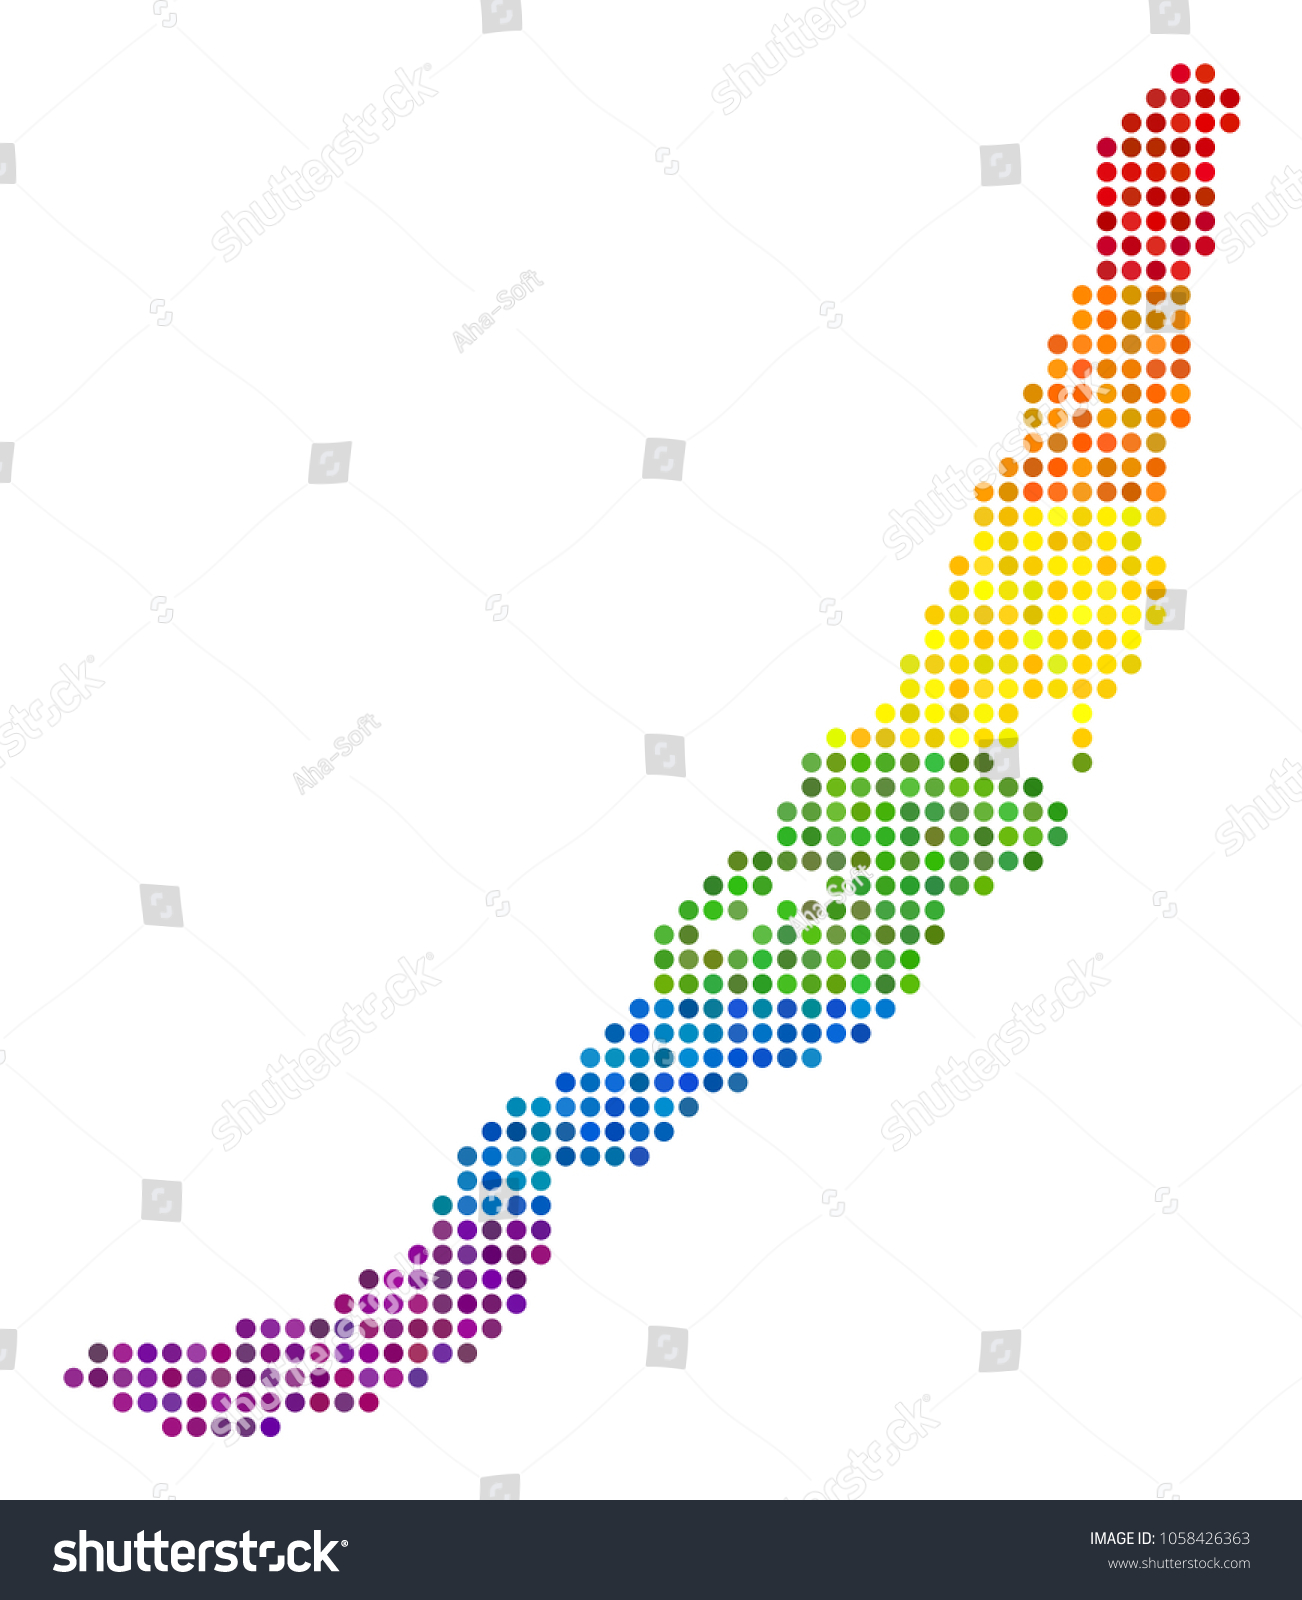 A Dotted Lgbt Pride Baikal Lake Map For Lesbians Royalty Free Stock Vector 1058426363 6896